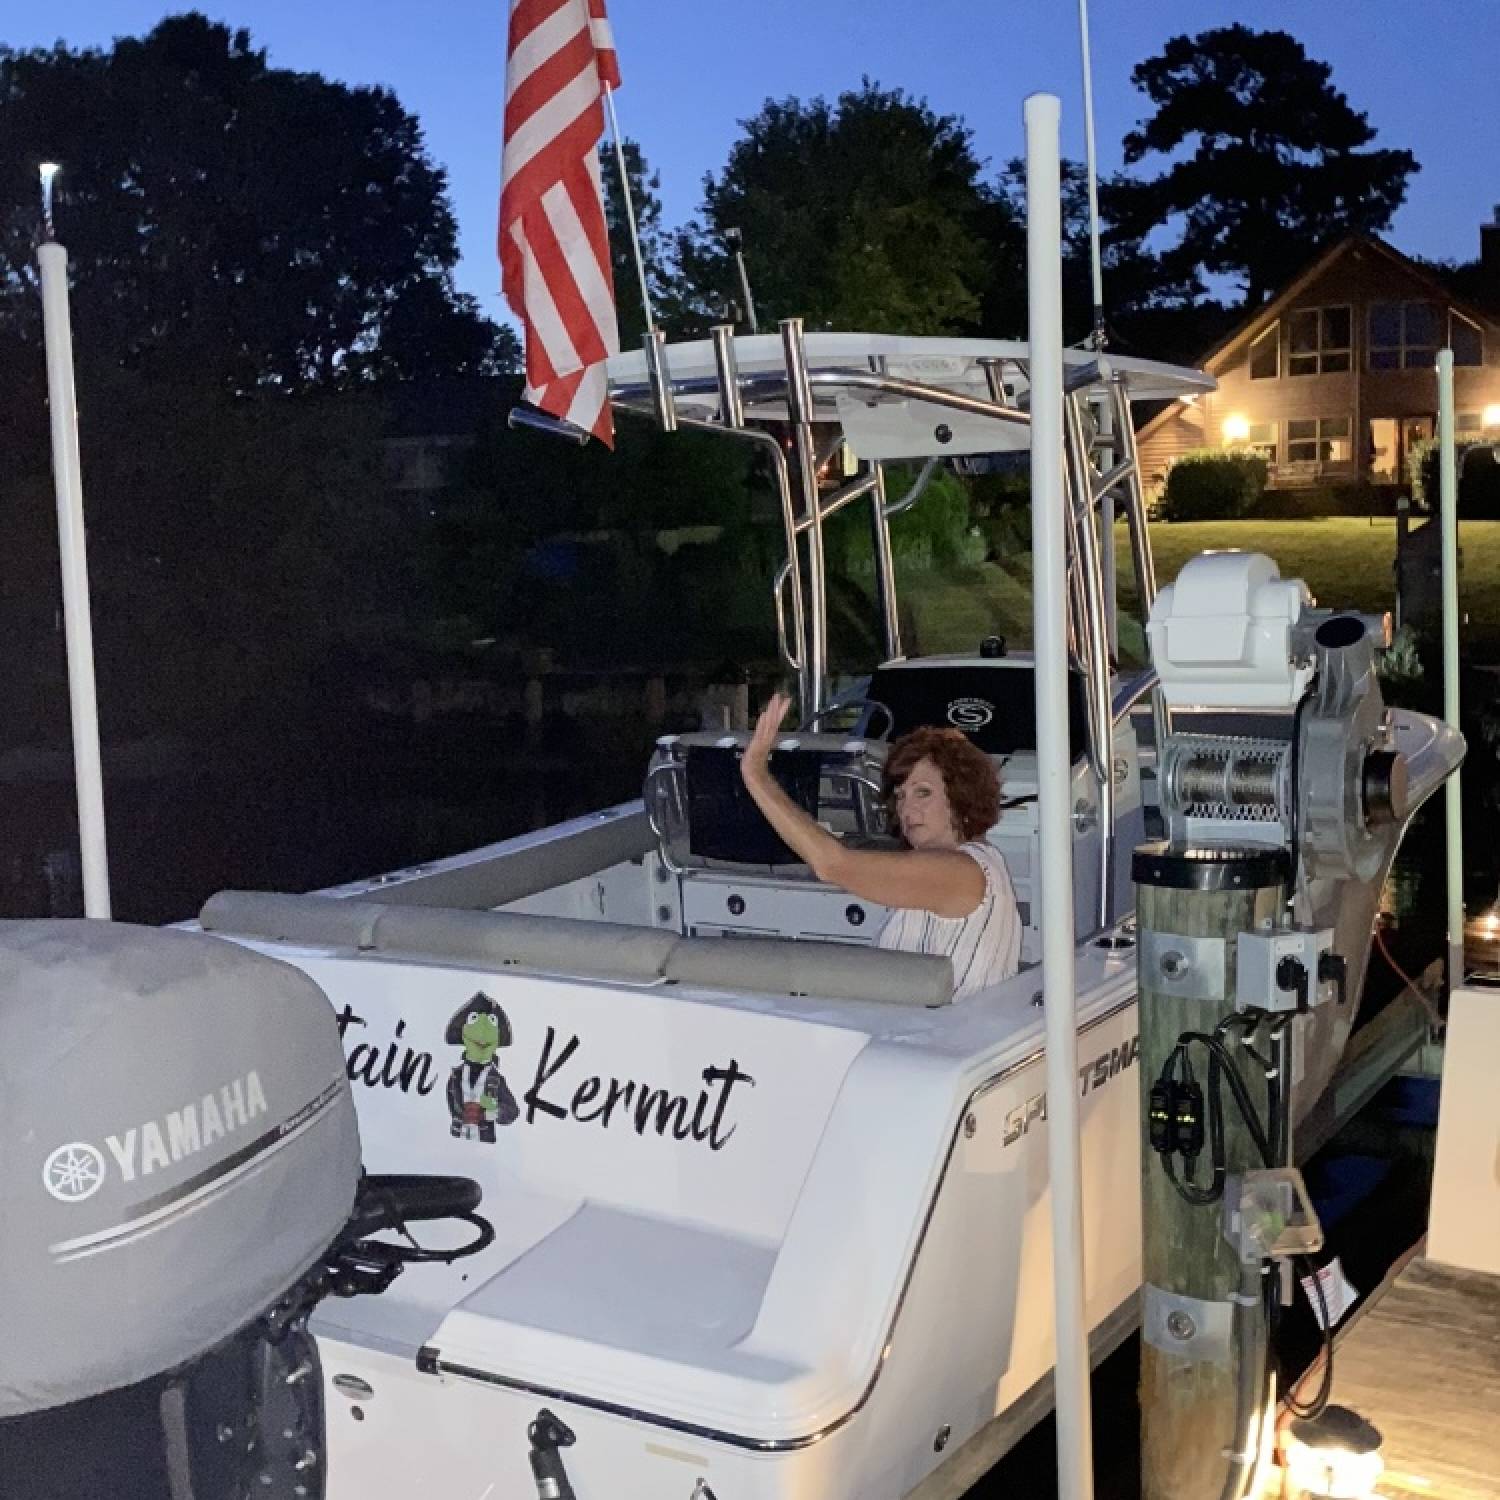 Title: Enjoy the Evening - On board their Sportsman Heritage 231 Center Console - Location: Solomon Island. Participating in the Photo Contest #SportsmanMarch2023